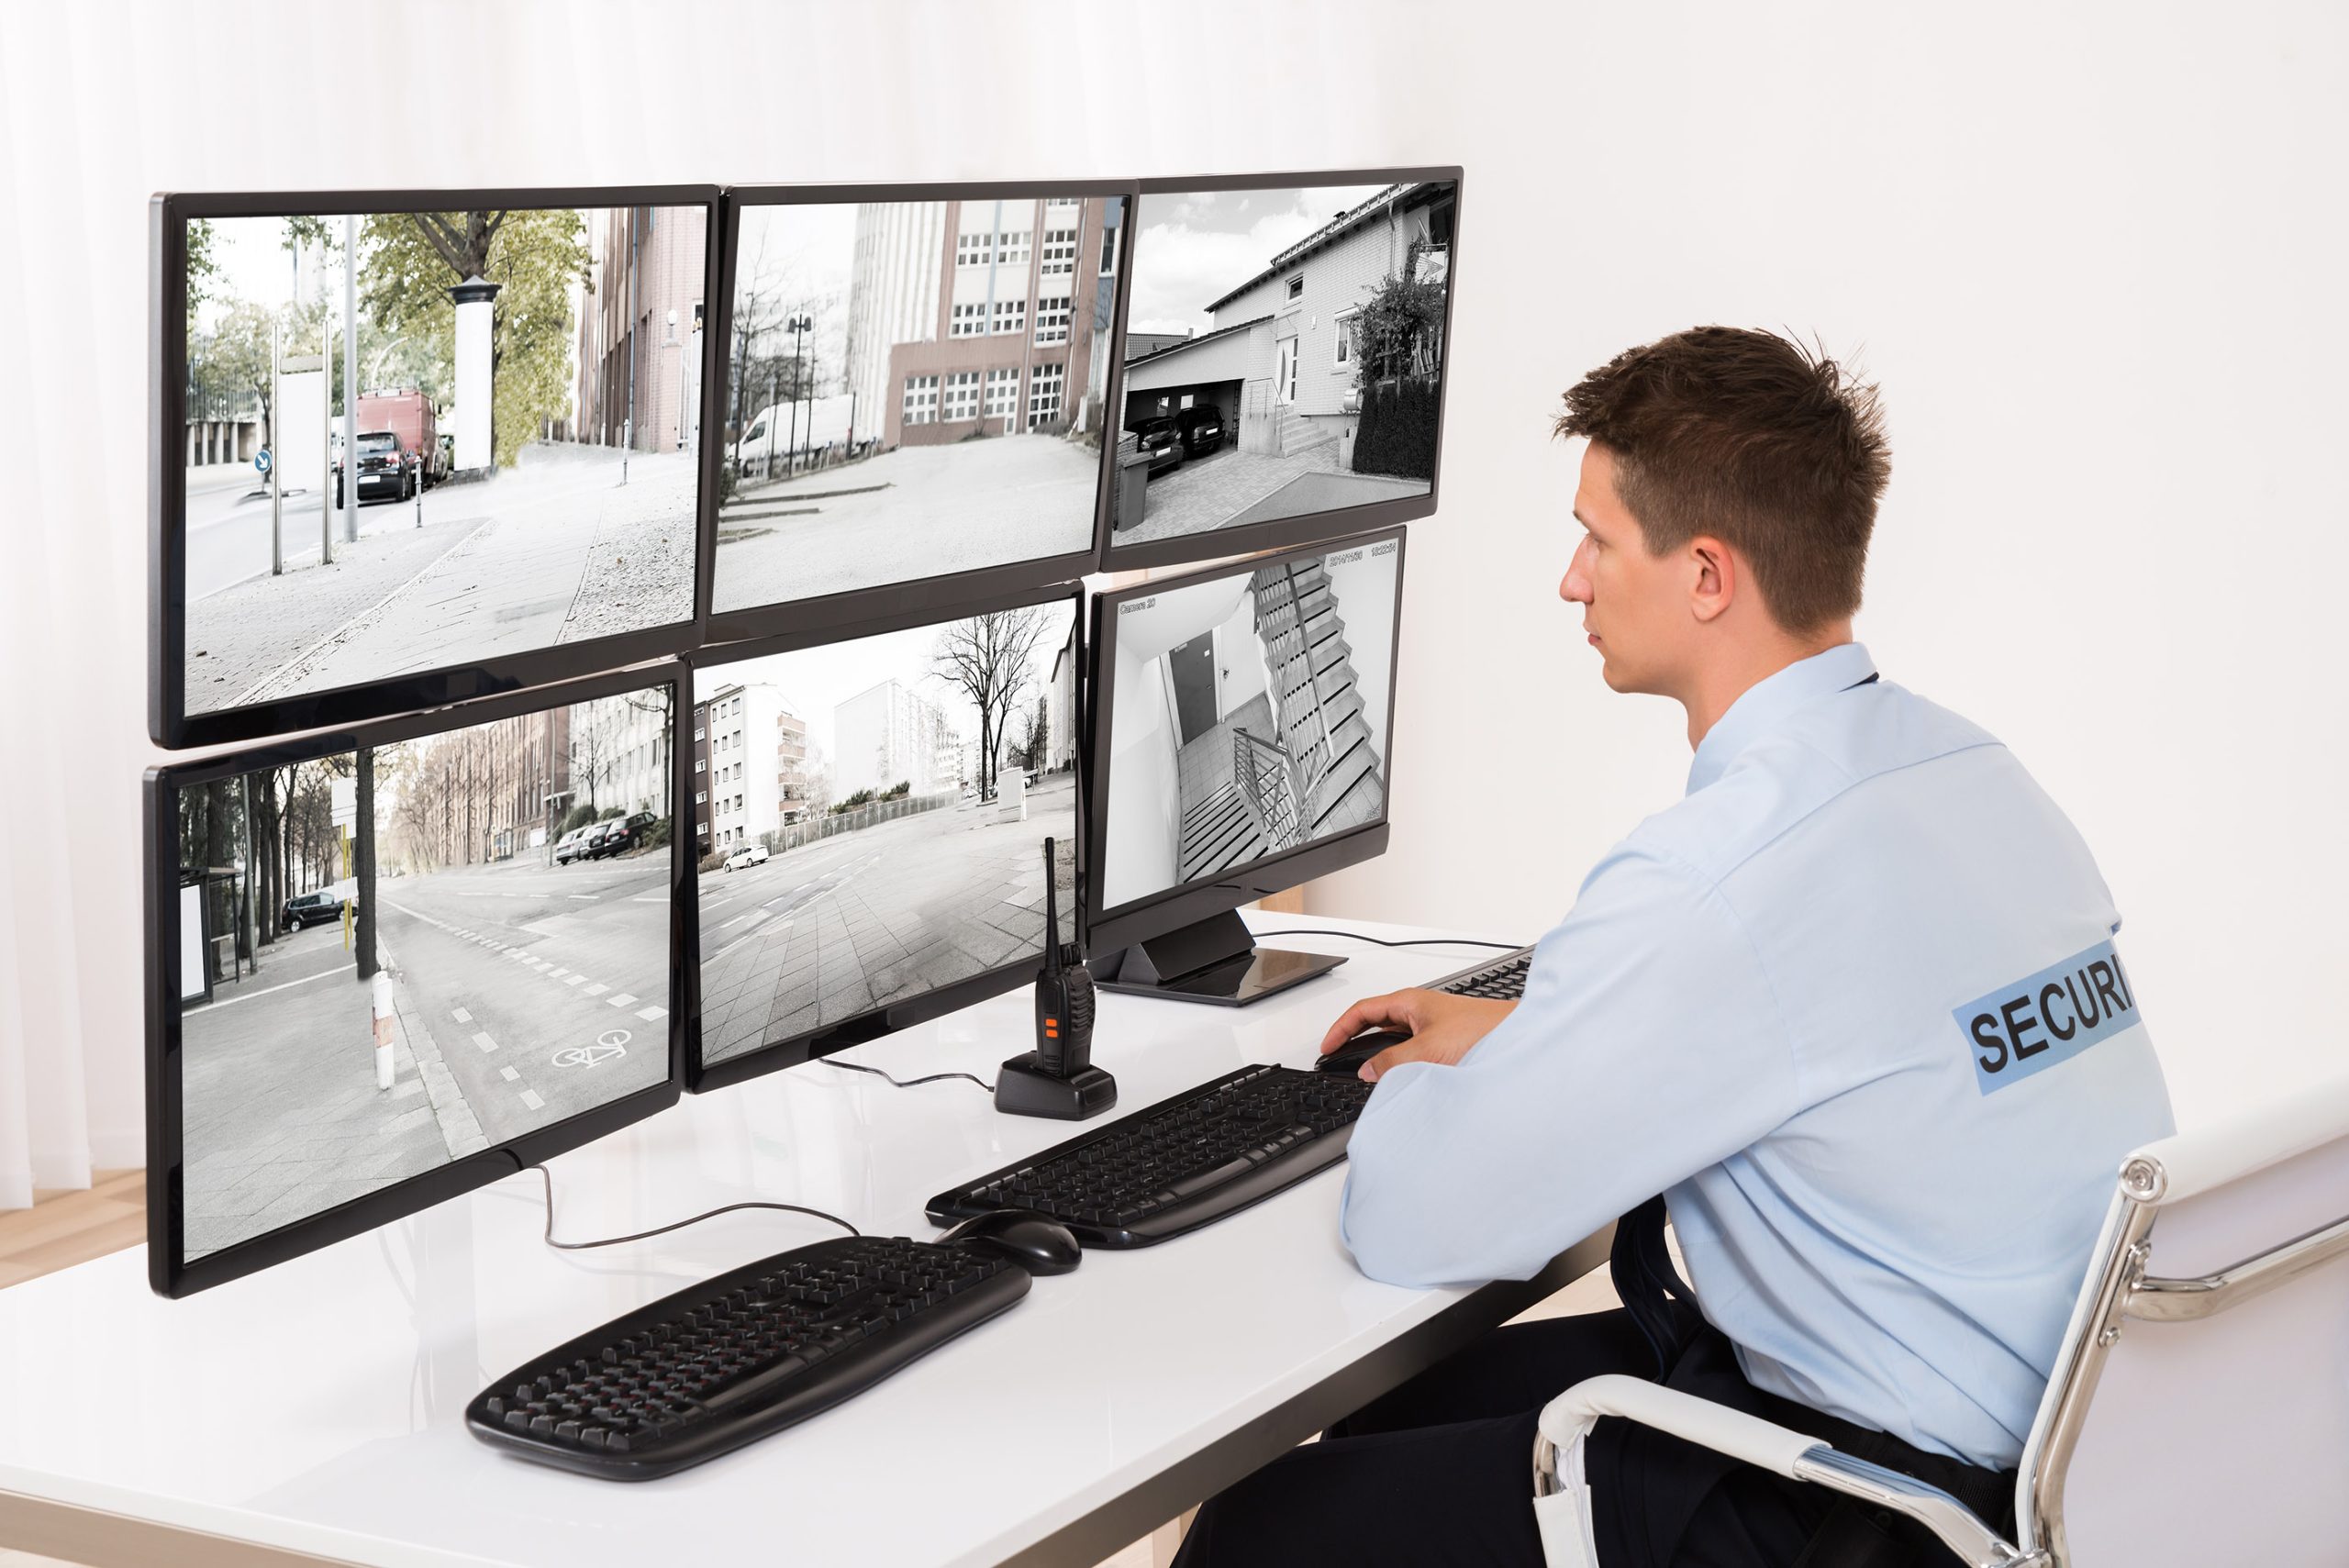 Security Guard Monitoring Multiple CCTV Footage